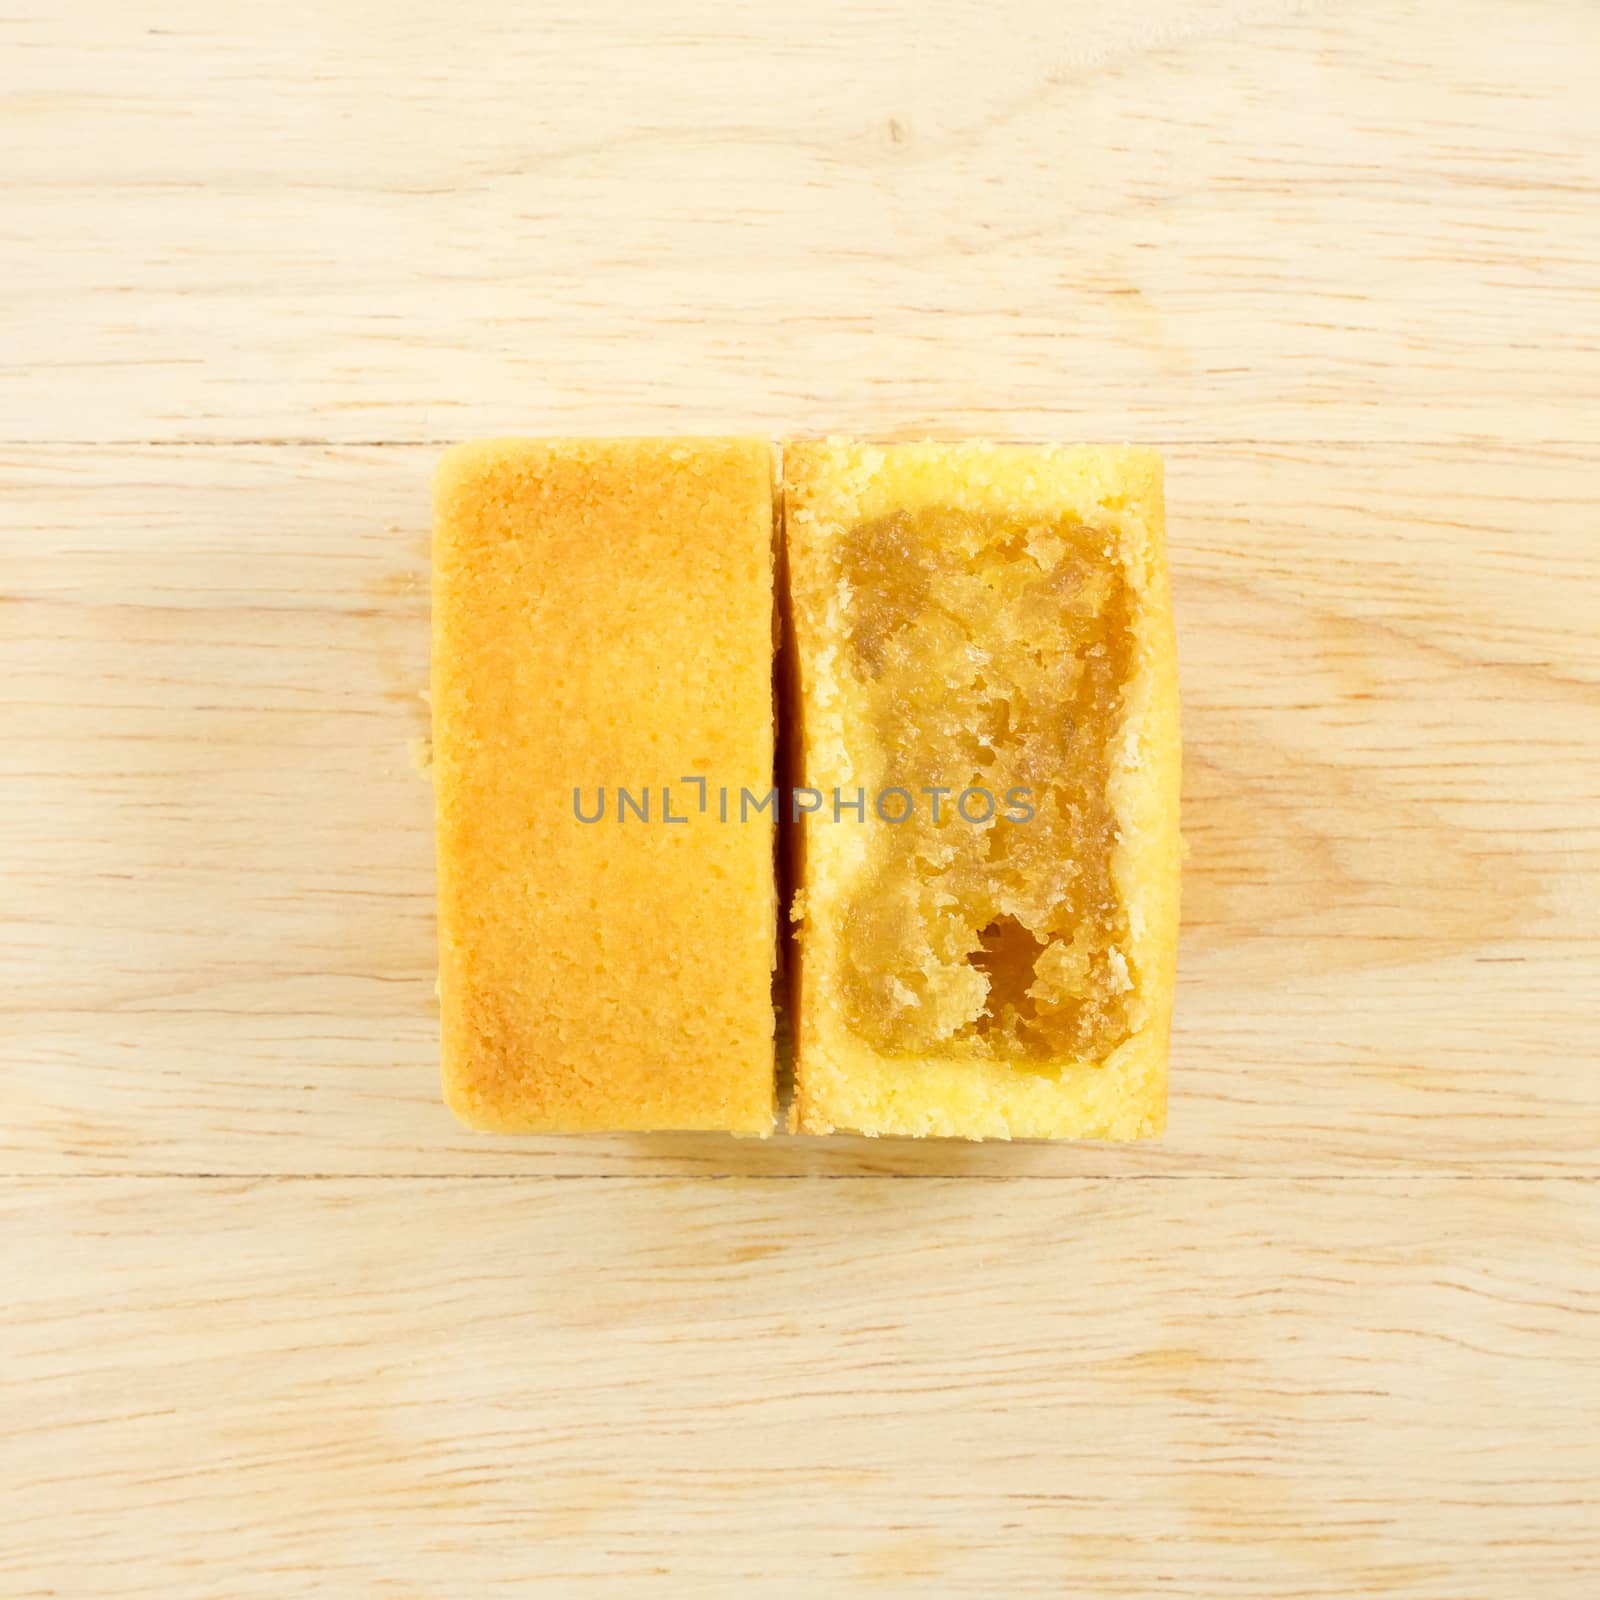 The tasty Taiwanese pineapple pastry cake with egg yolk on the wooden plank.